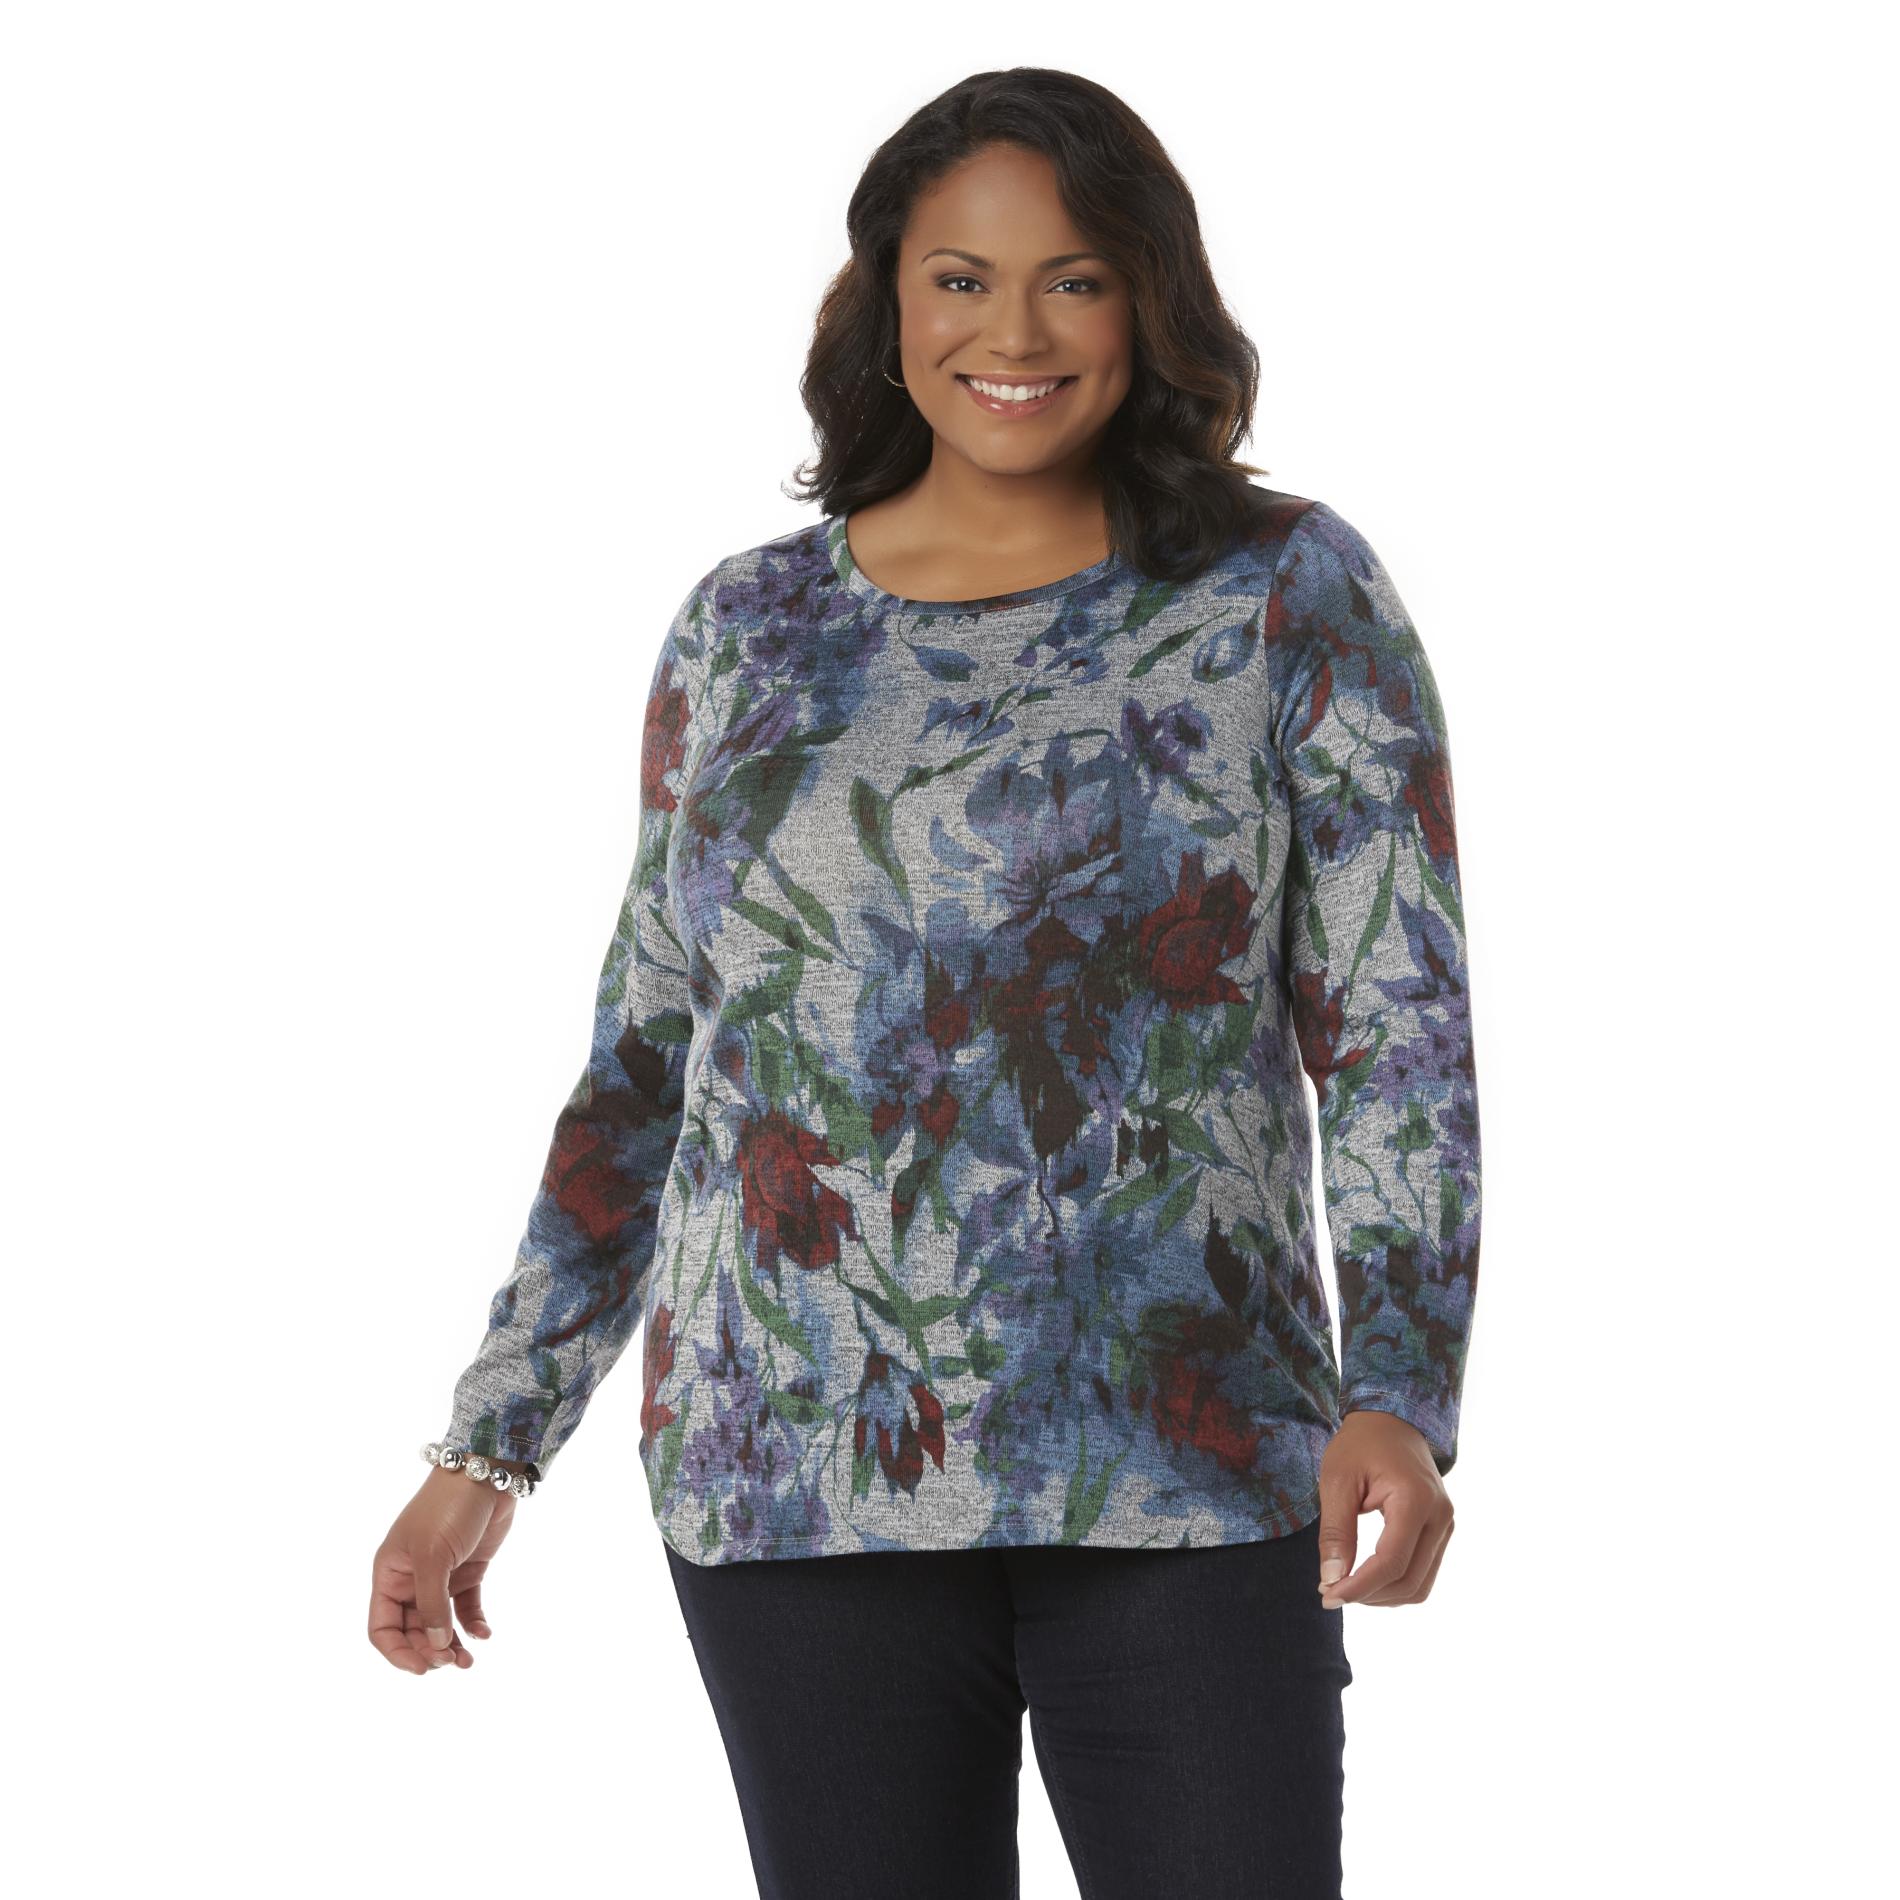 Basic Editions Women's Plus Hacci Knit Sweater - Floral